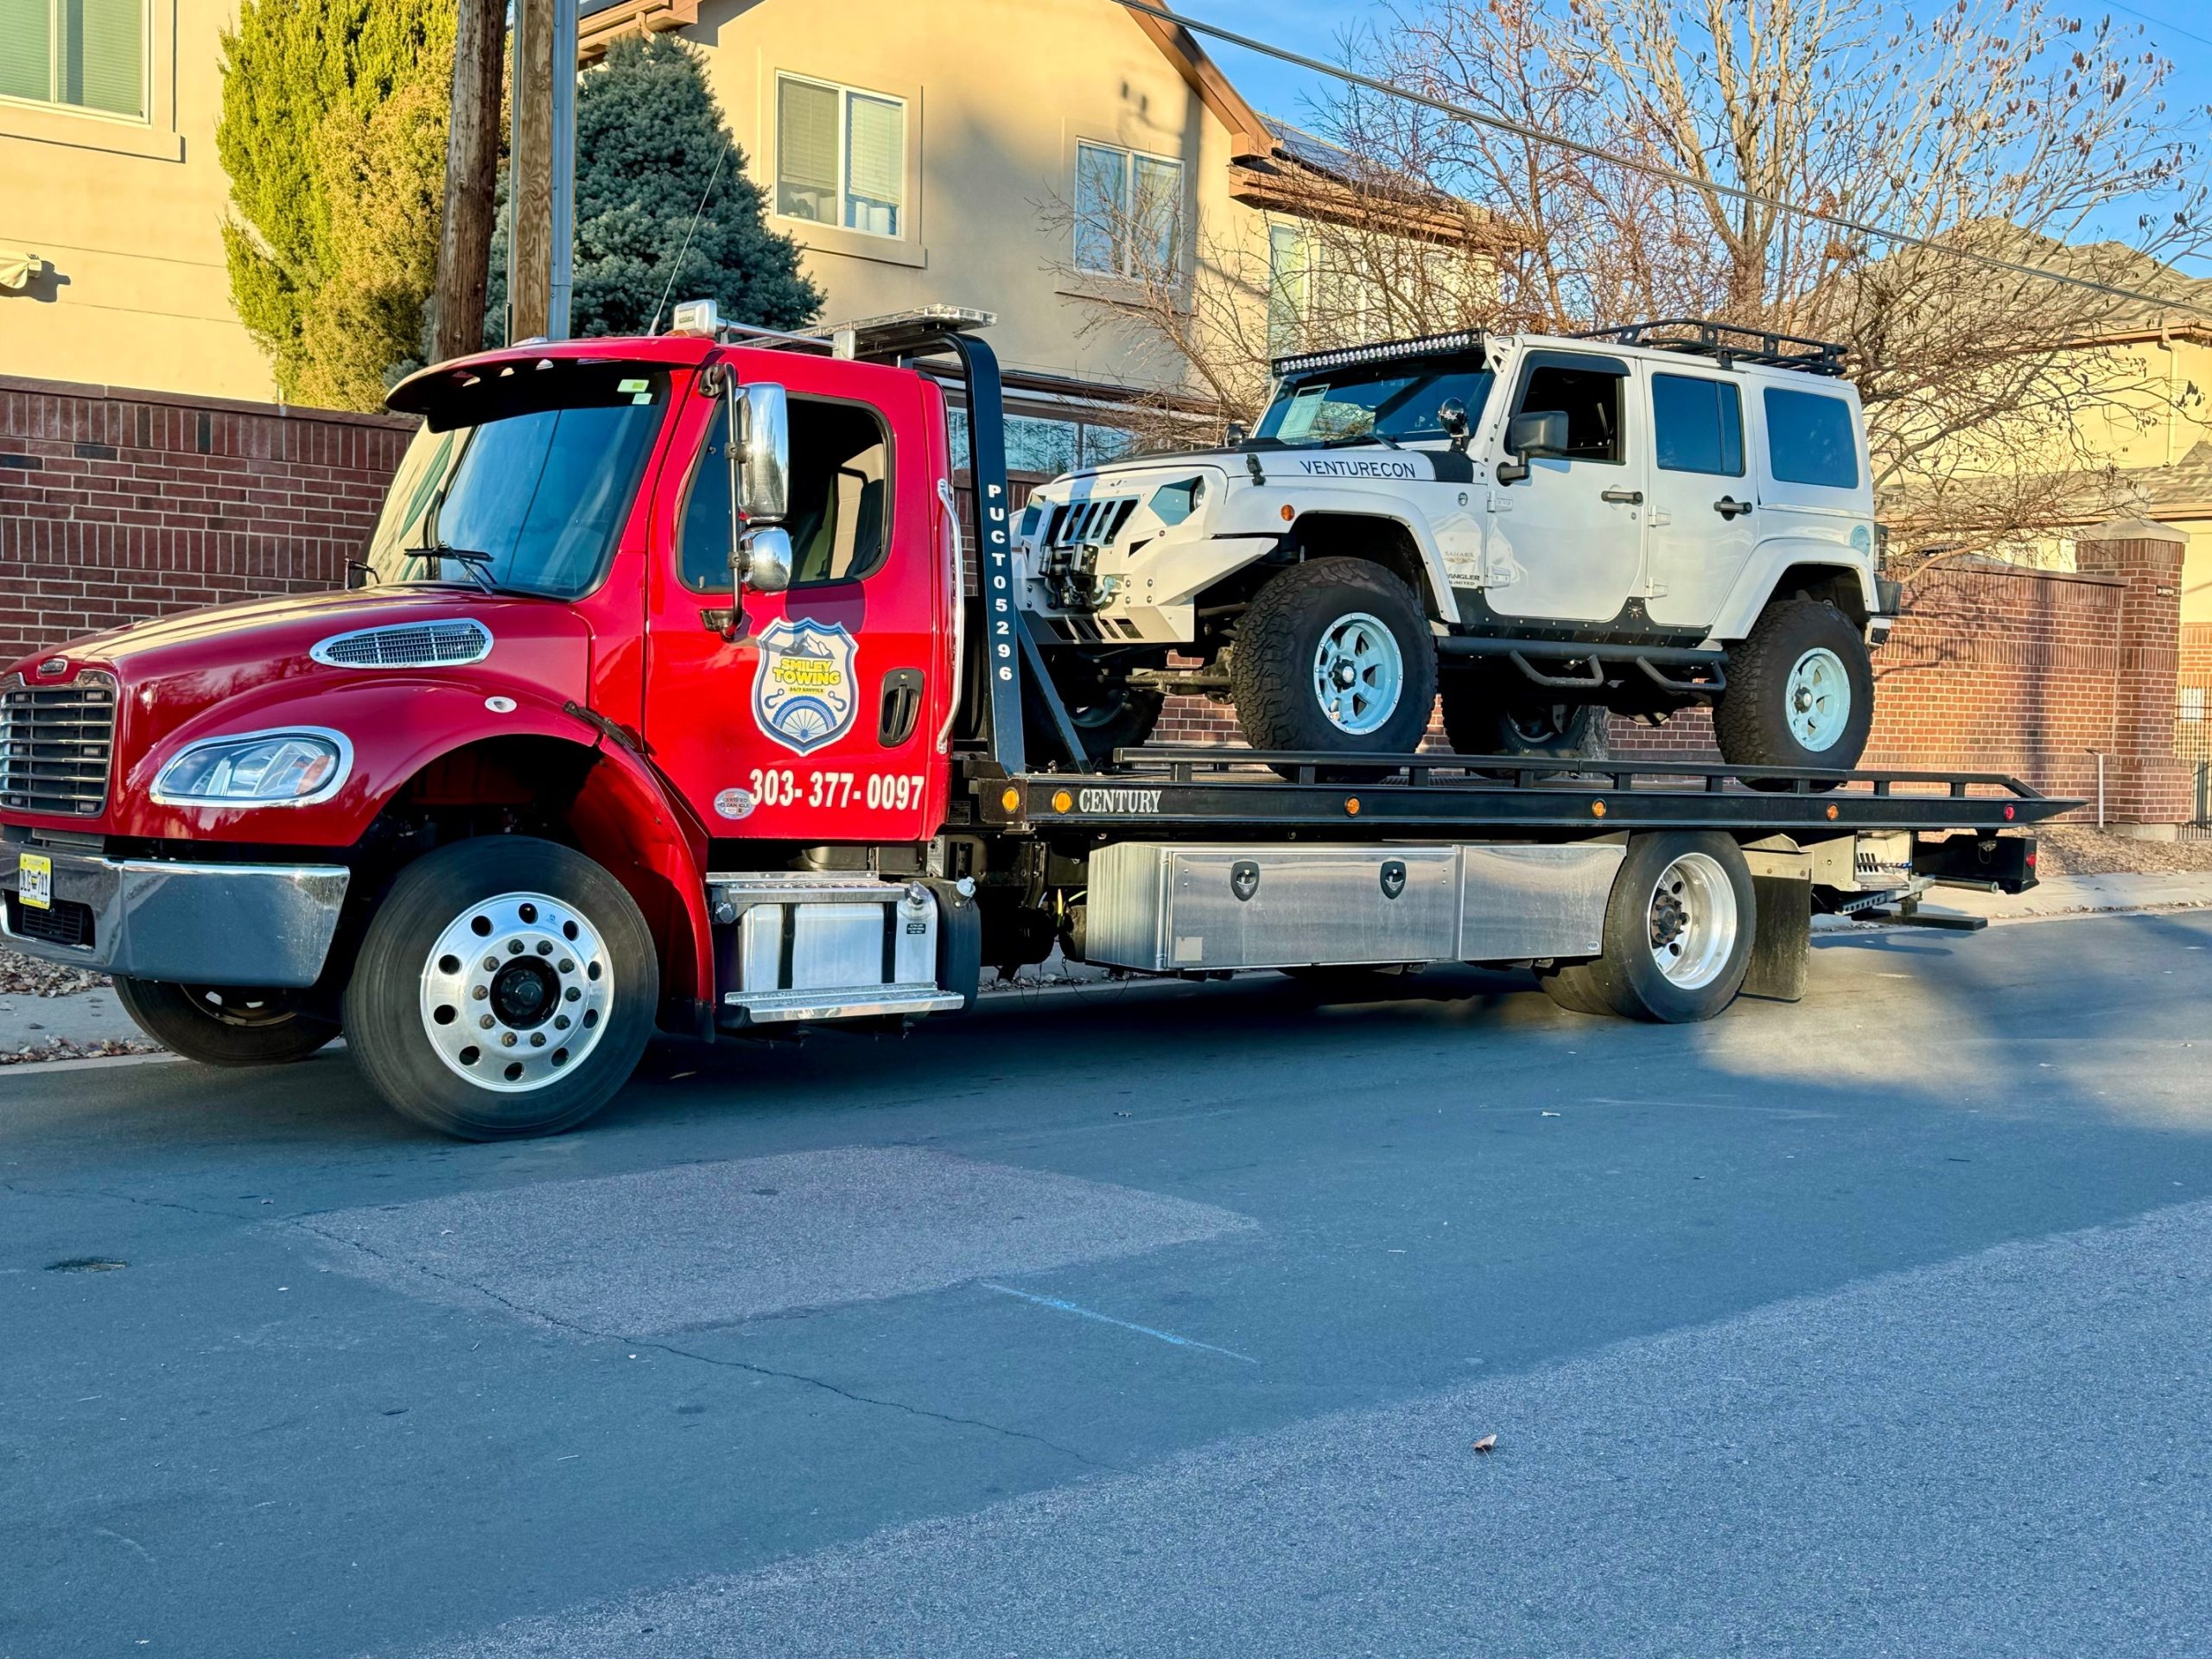 this image shows towing services in Glendale, CO